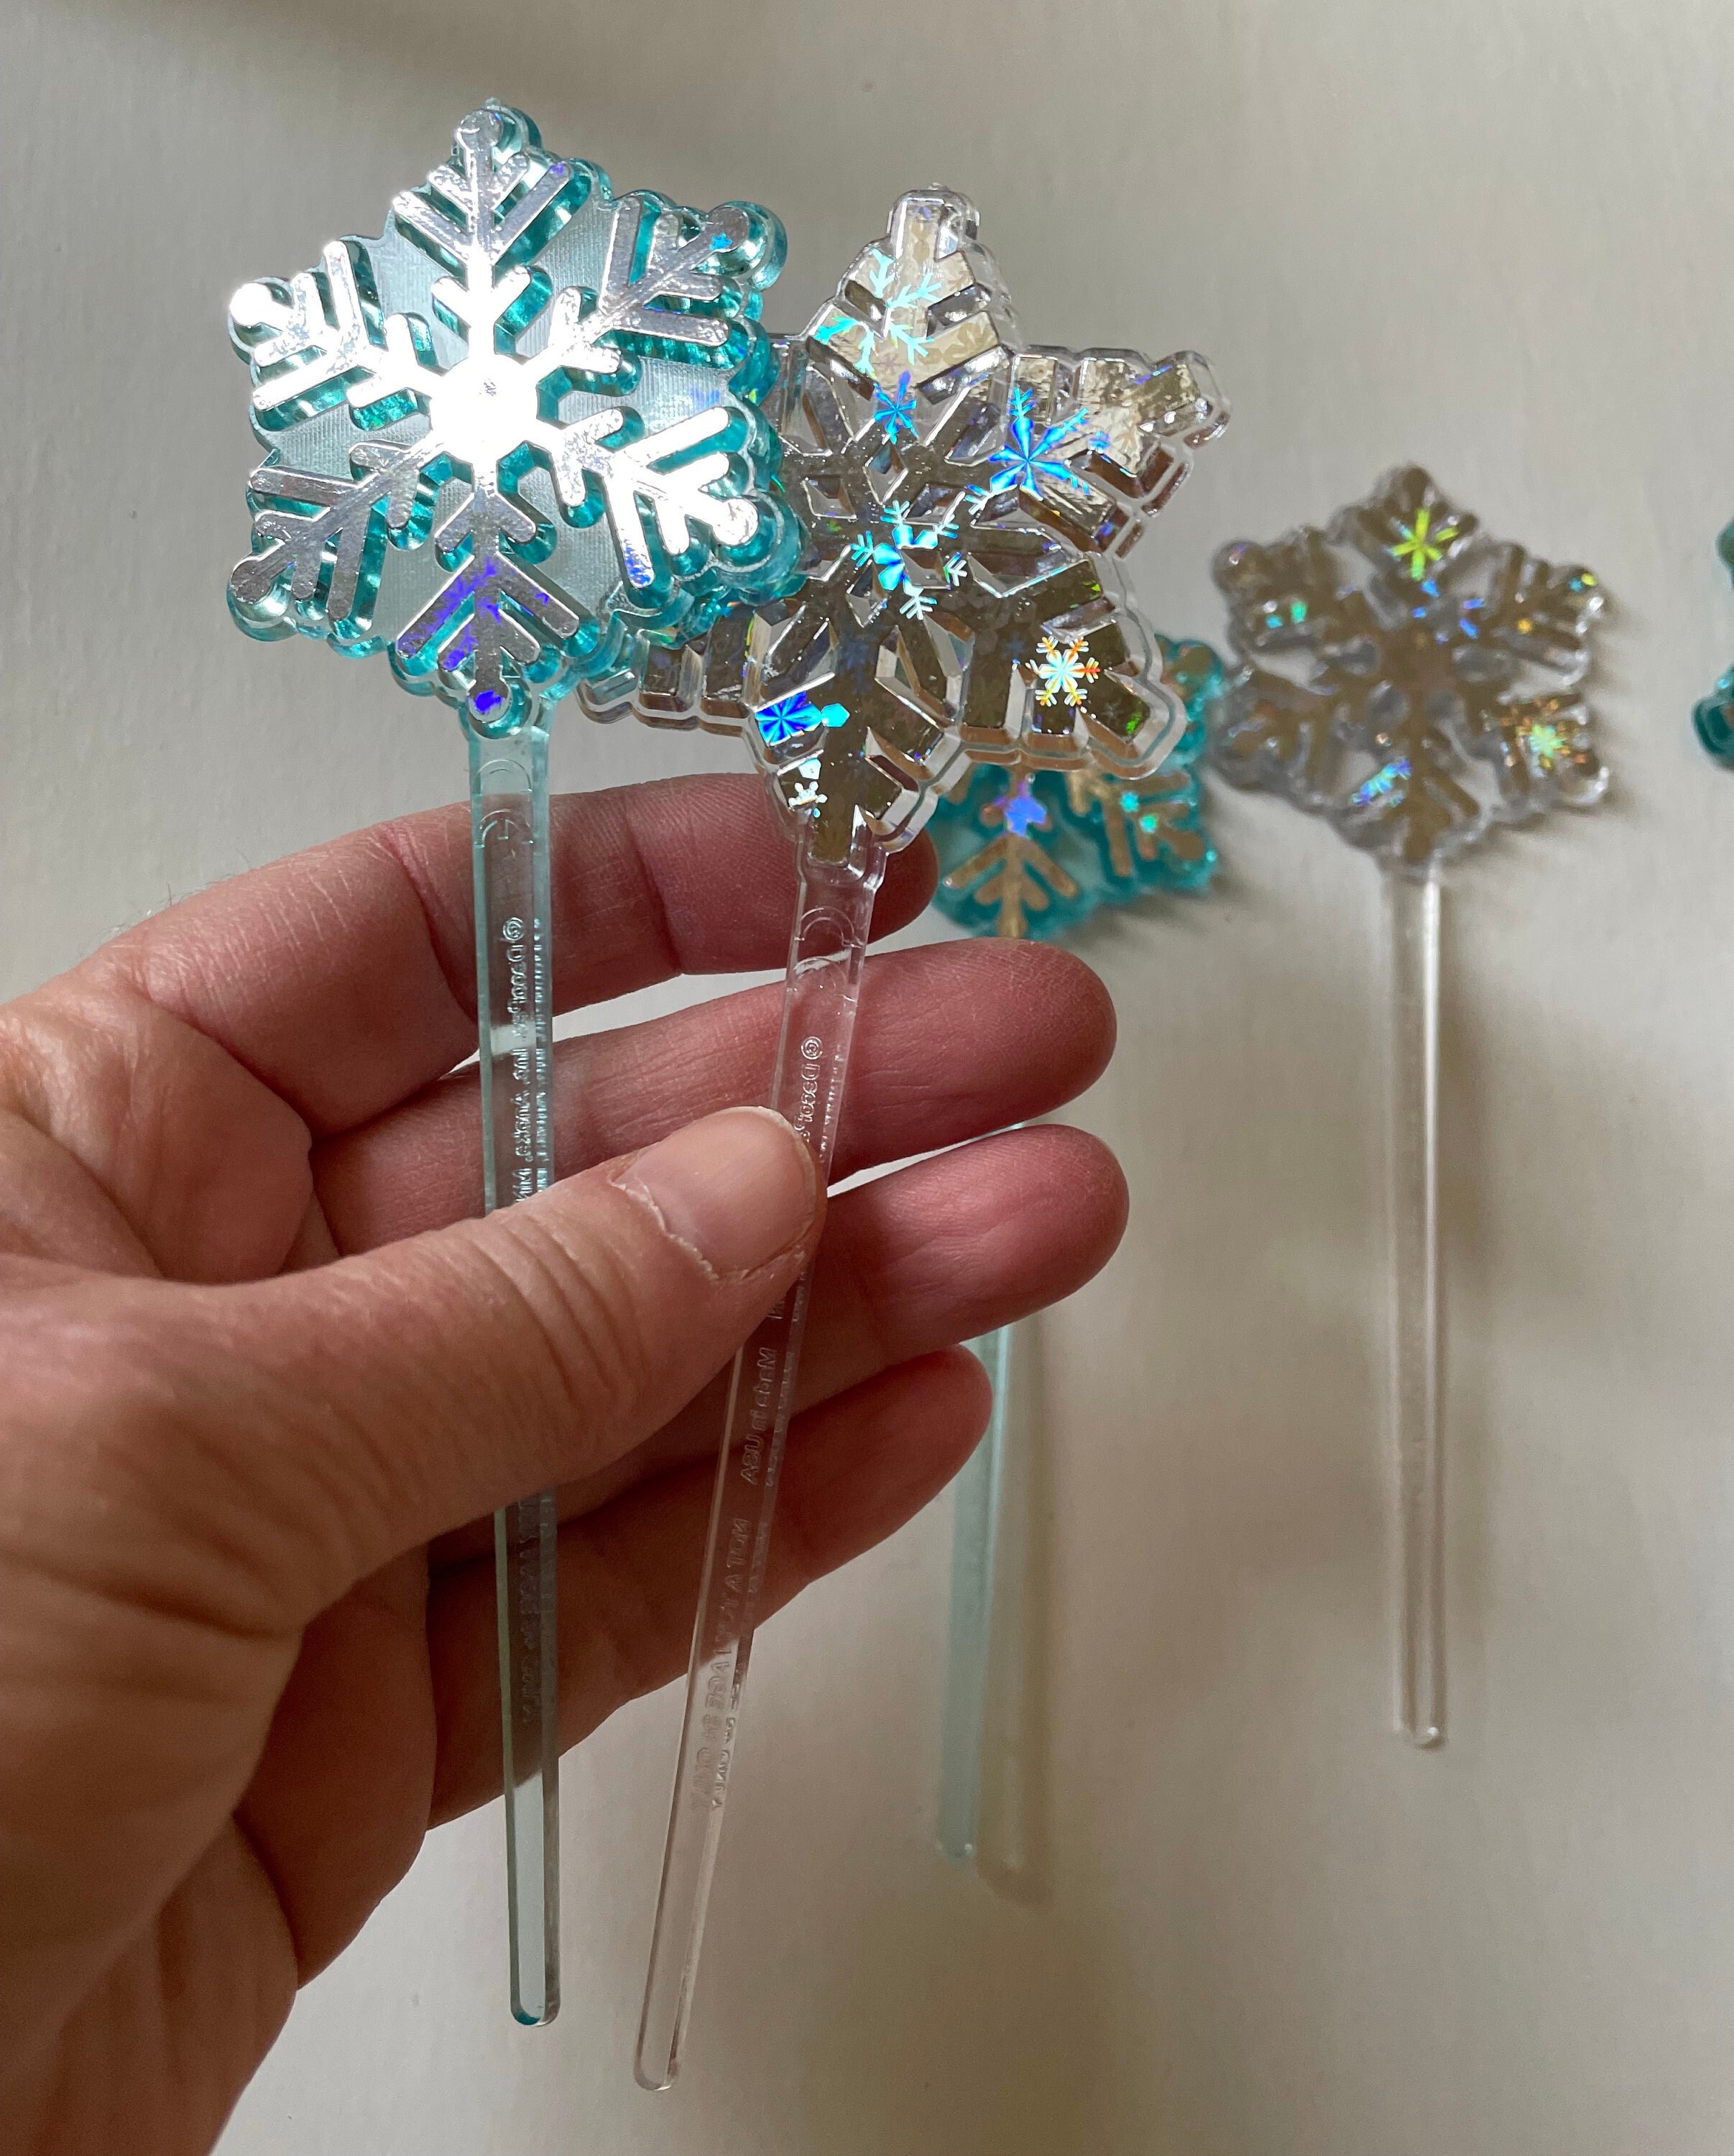 US$ 6.30 - Silver Snowflake Cake Topper Iridescent birthday Party